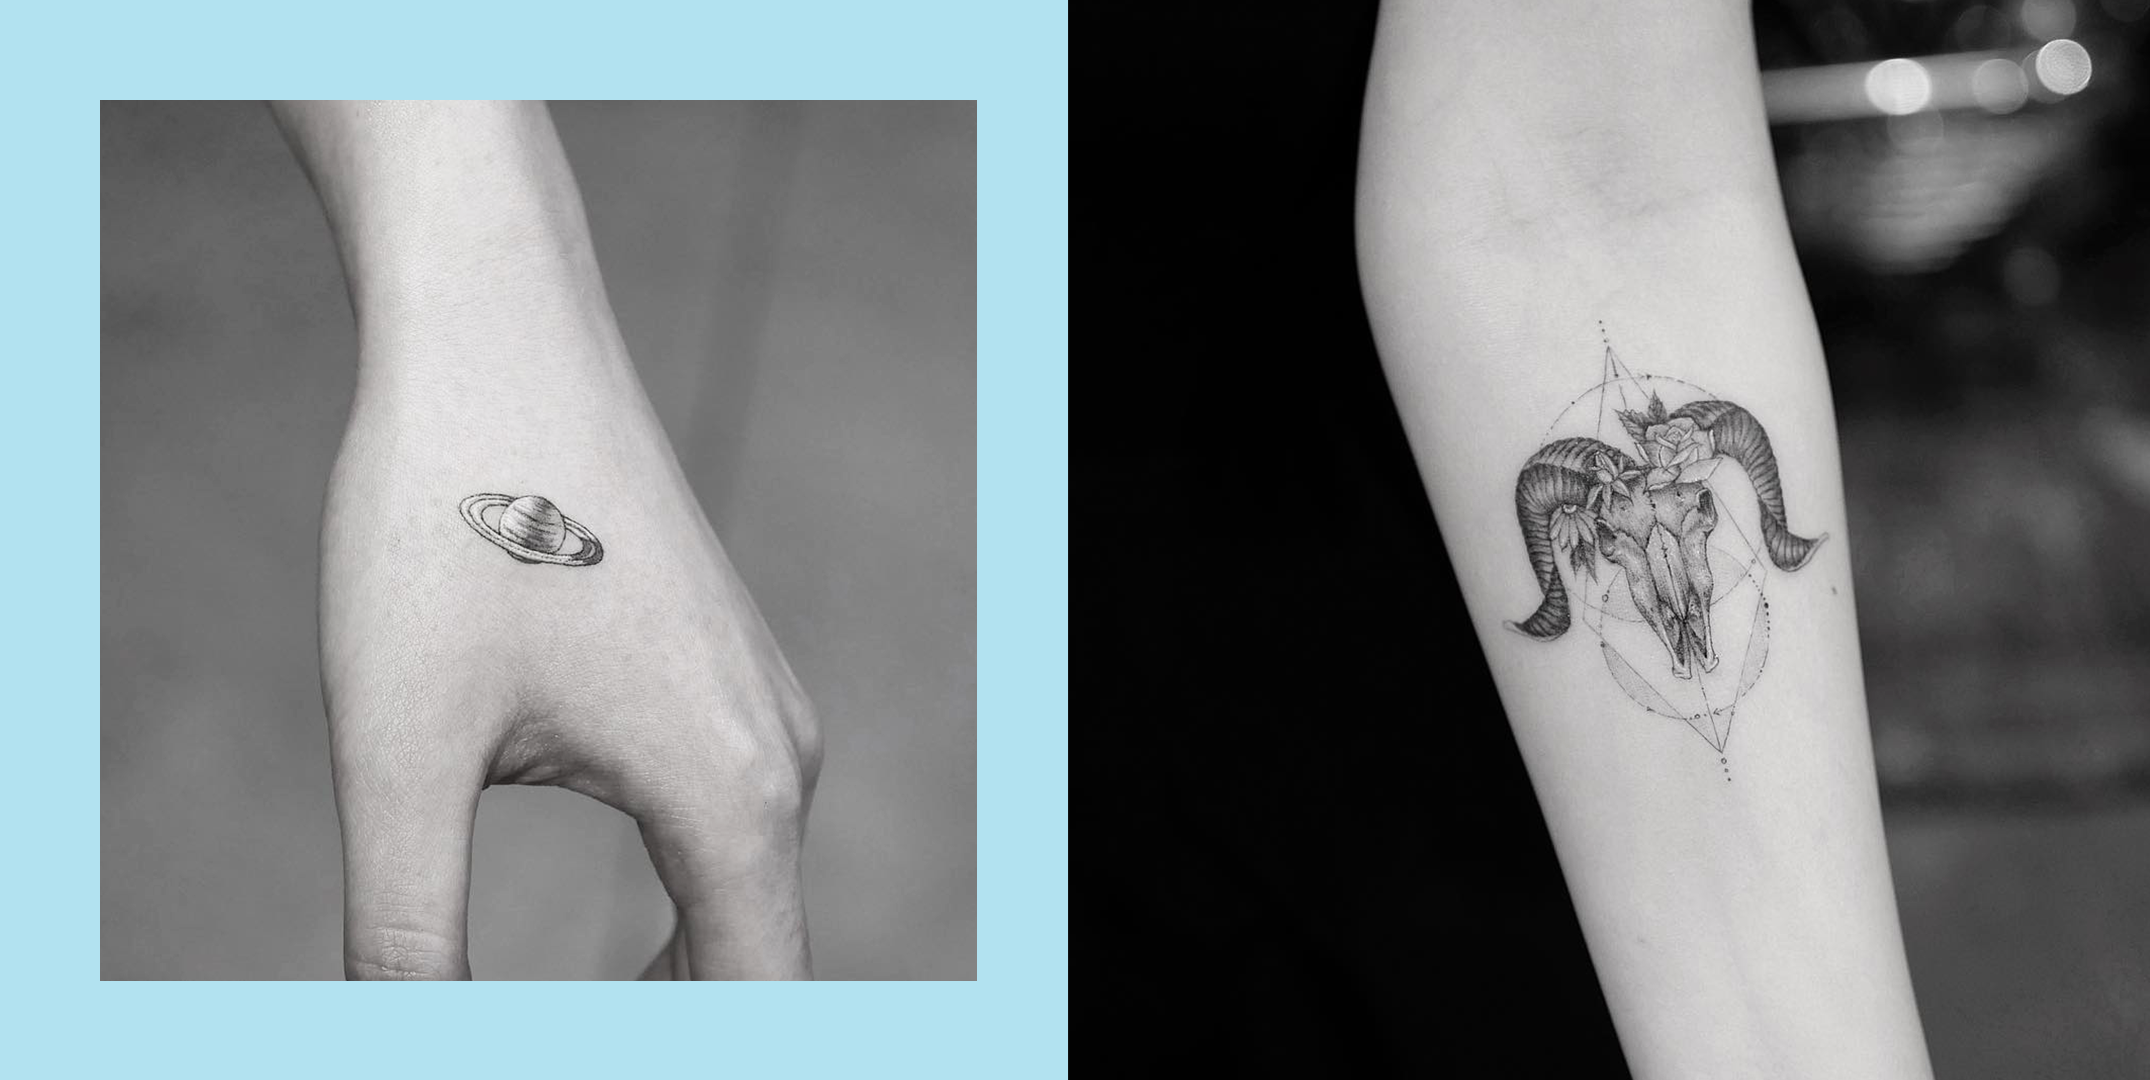 55 Best Capricorn Tattoo Designs  Main Meaning is 2019